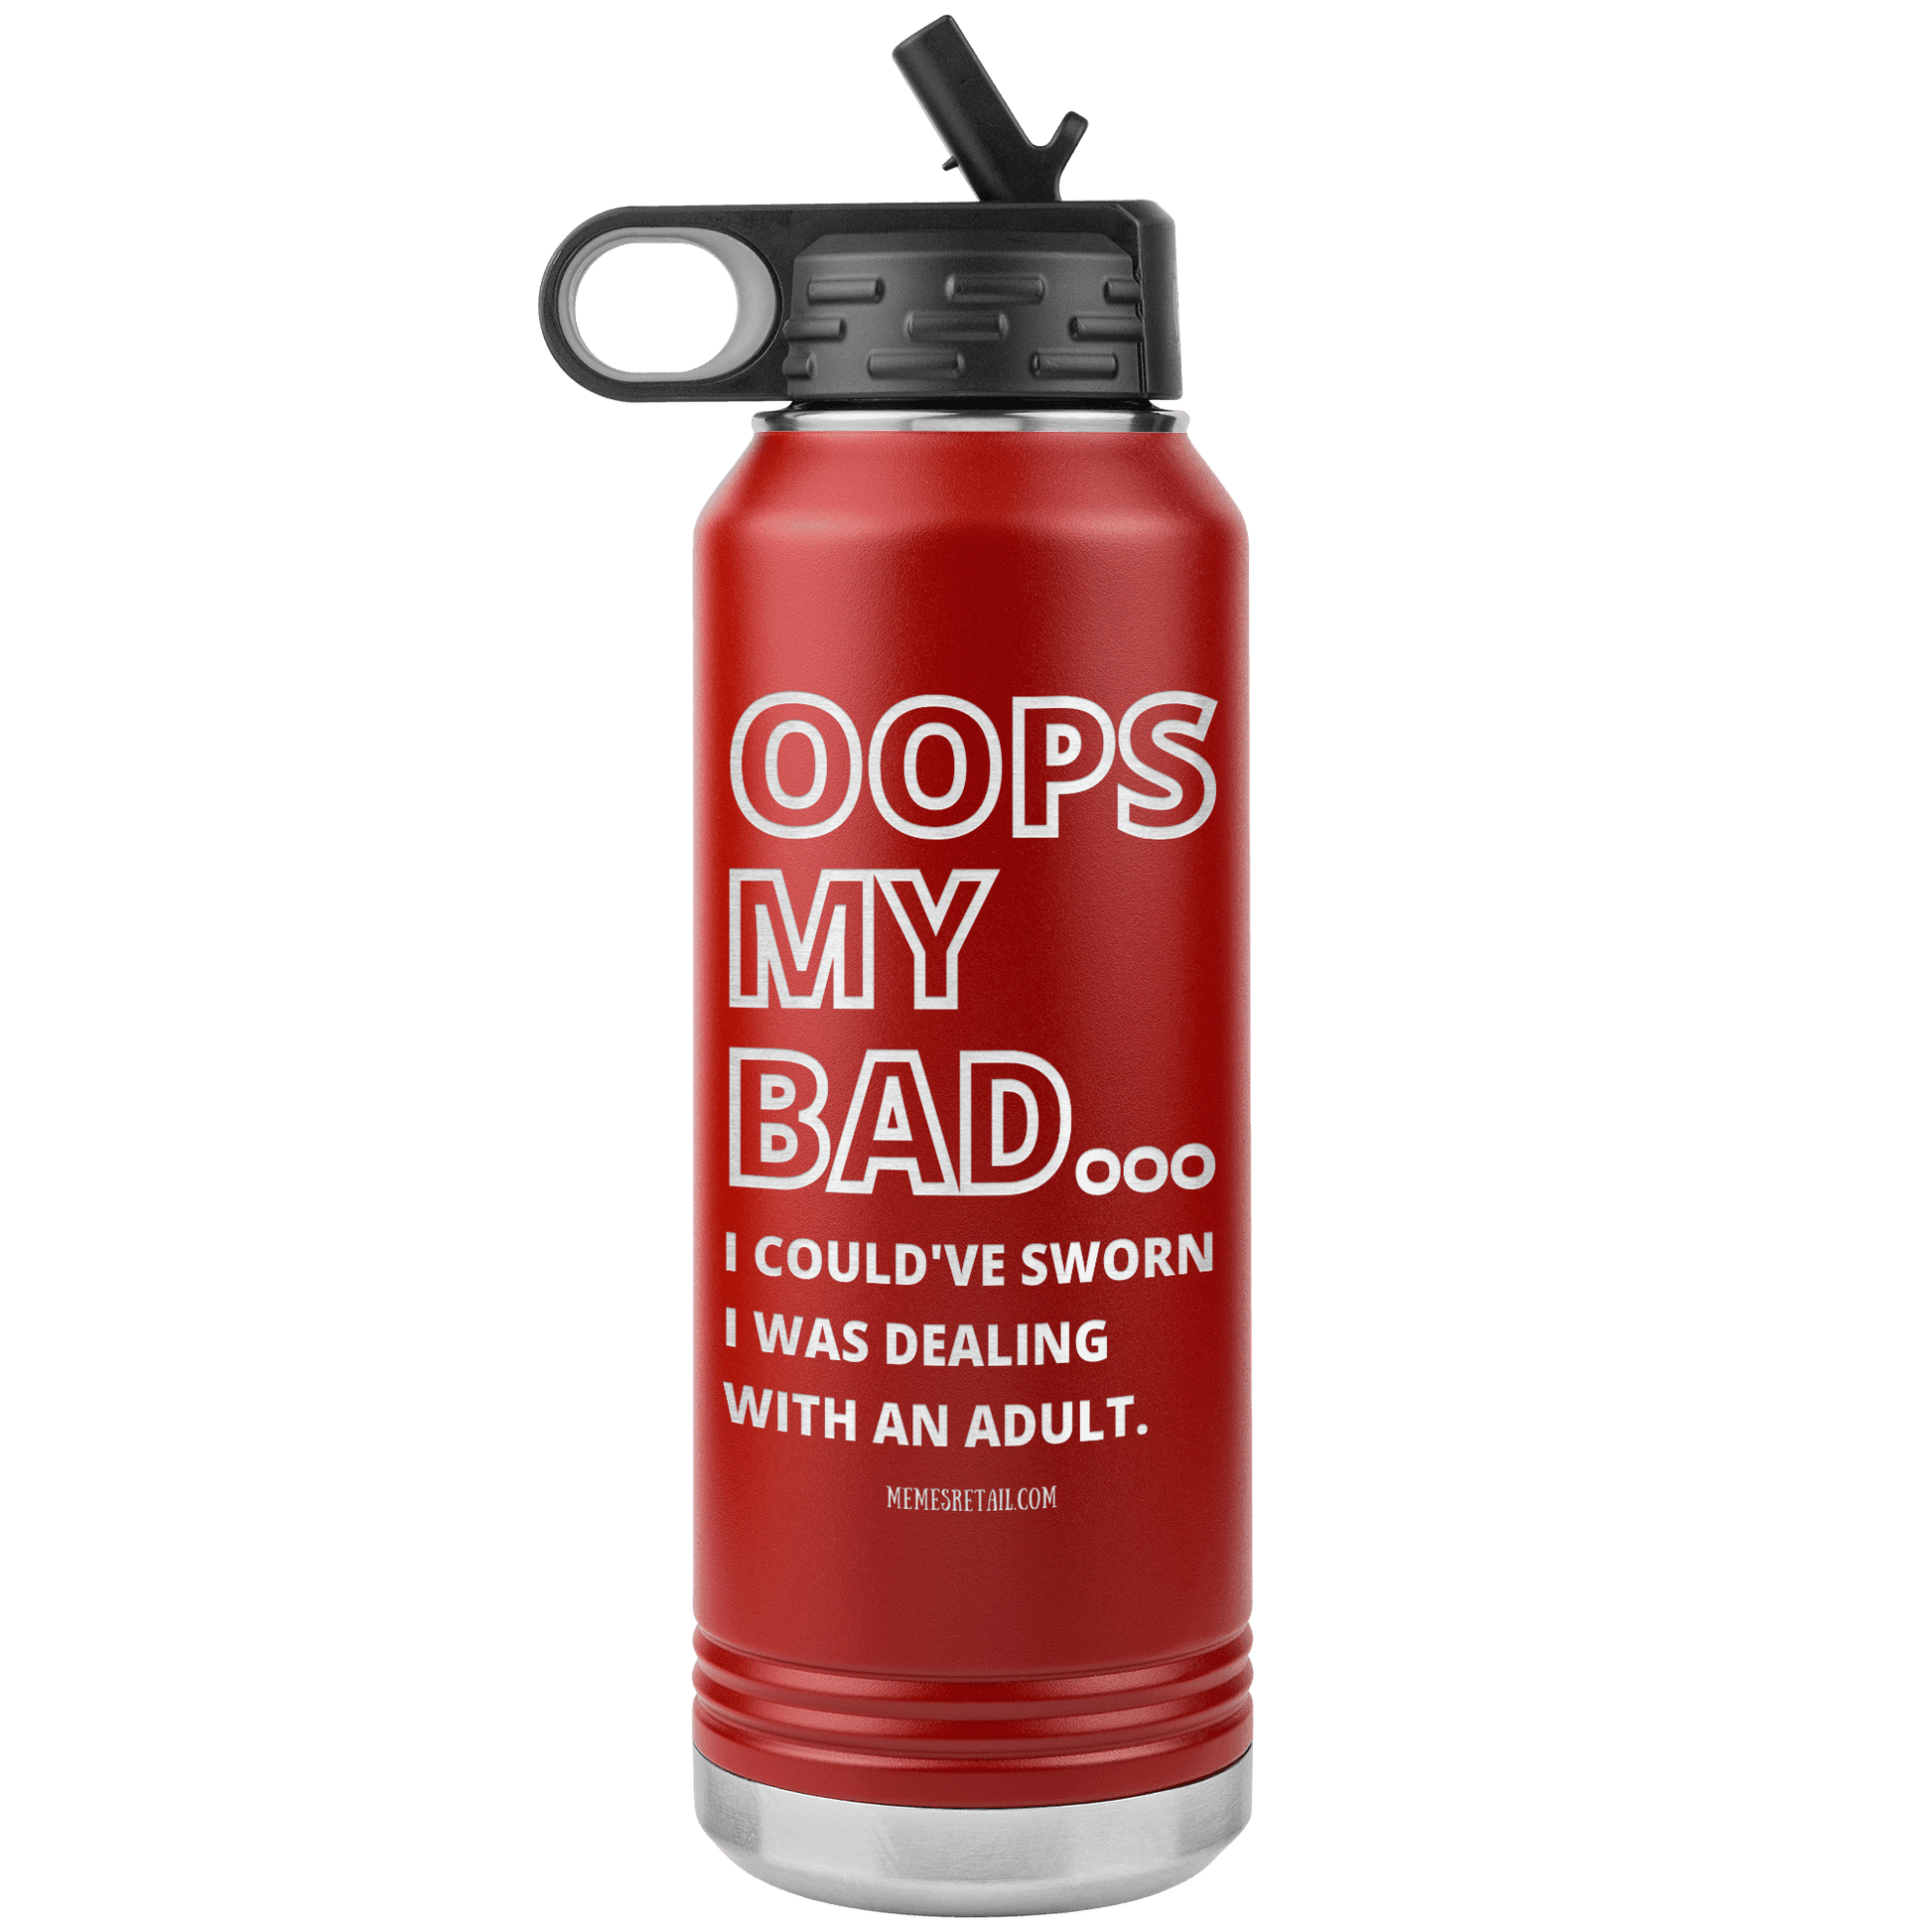 OOPS My bad...i could've sworn i was talking with an adult 32 oz Water Tumbler, Red - MemesRetail.com